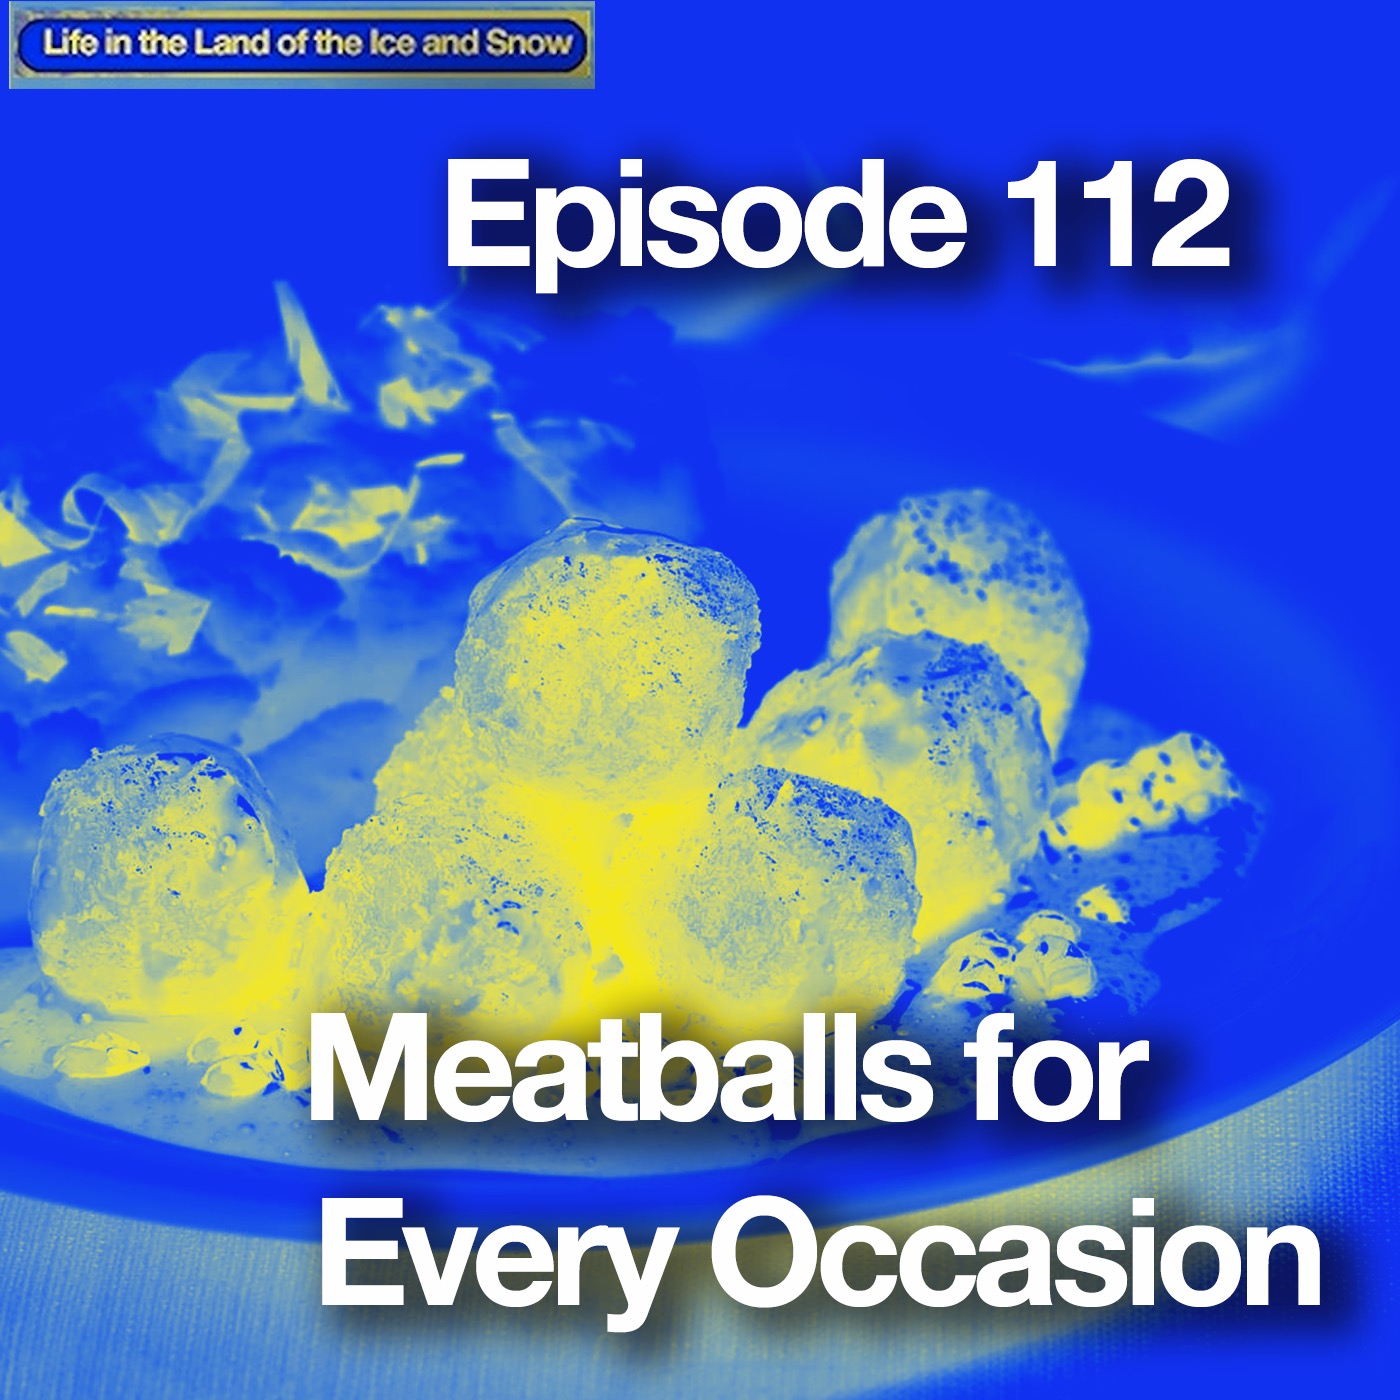 image shows meatballs on a plate